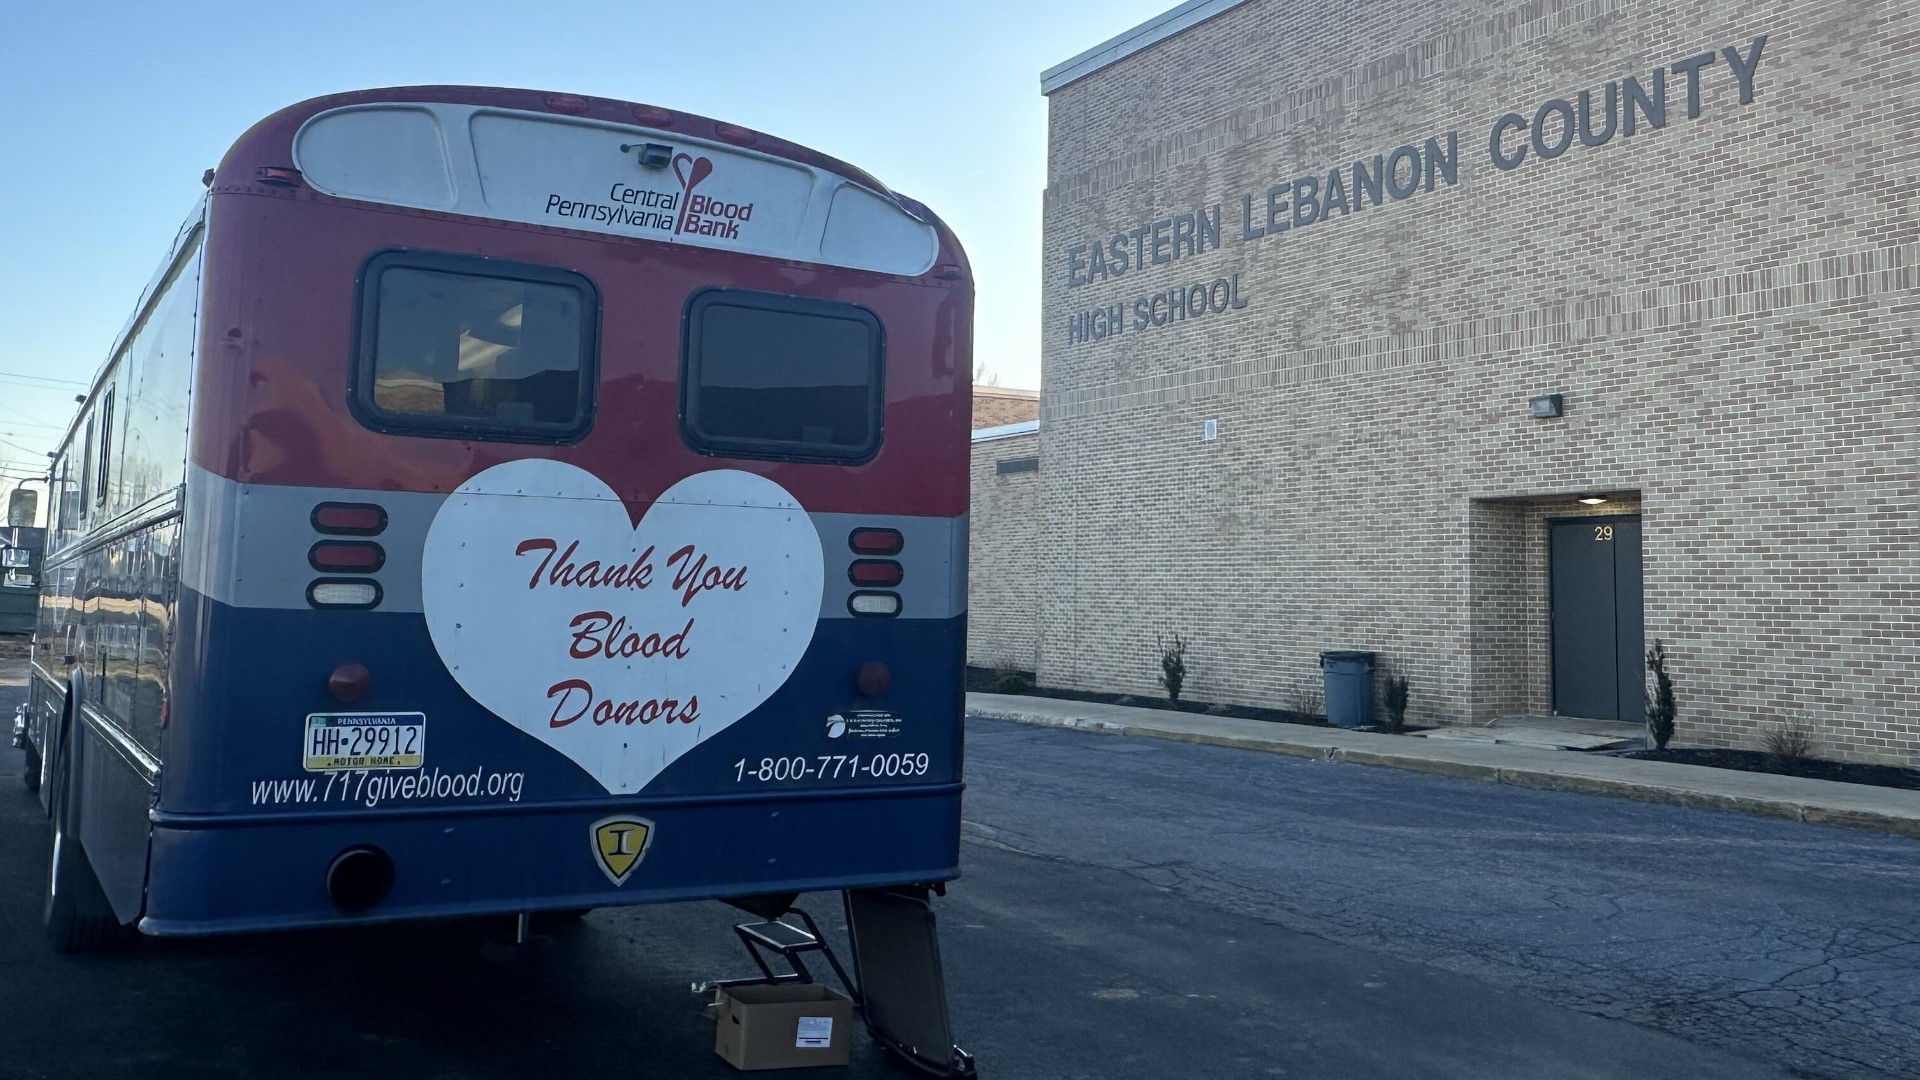 The blood drive has saved over 10,000 lives over the past 30 years.